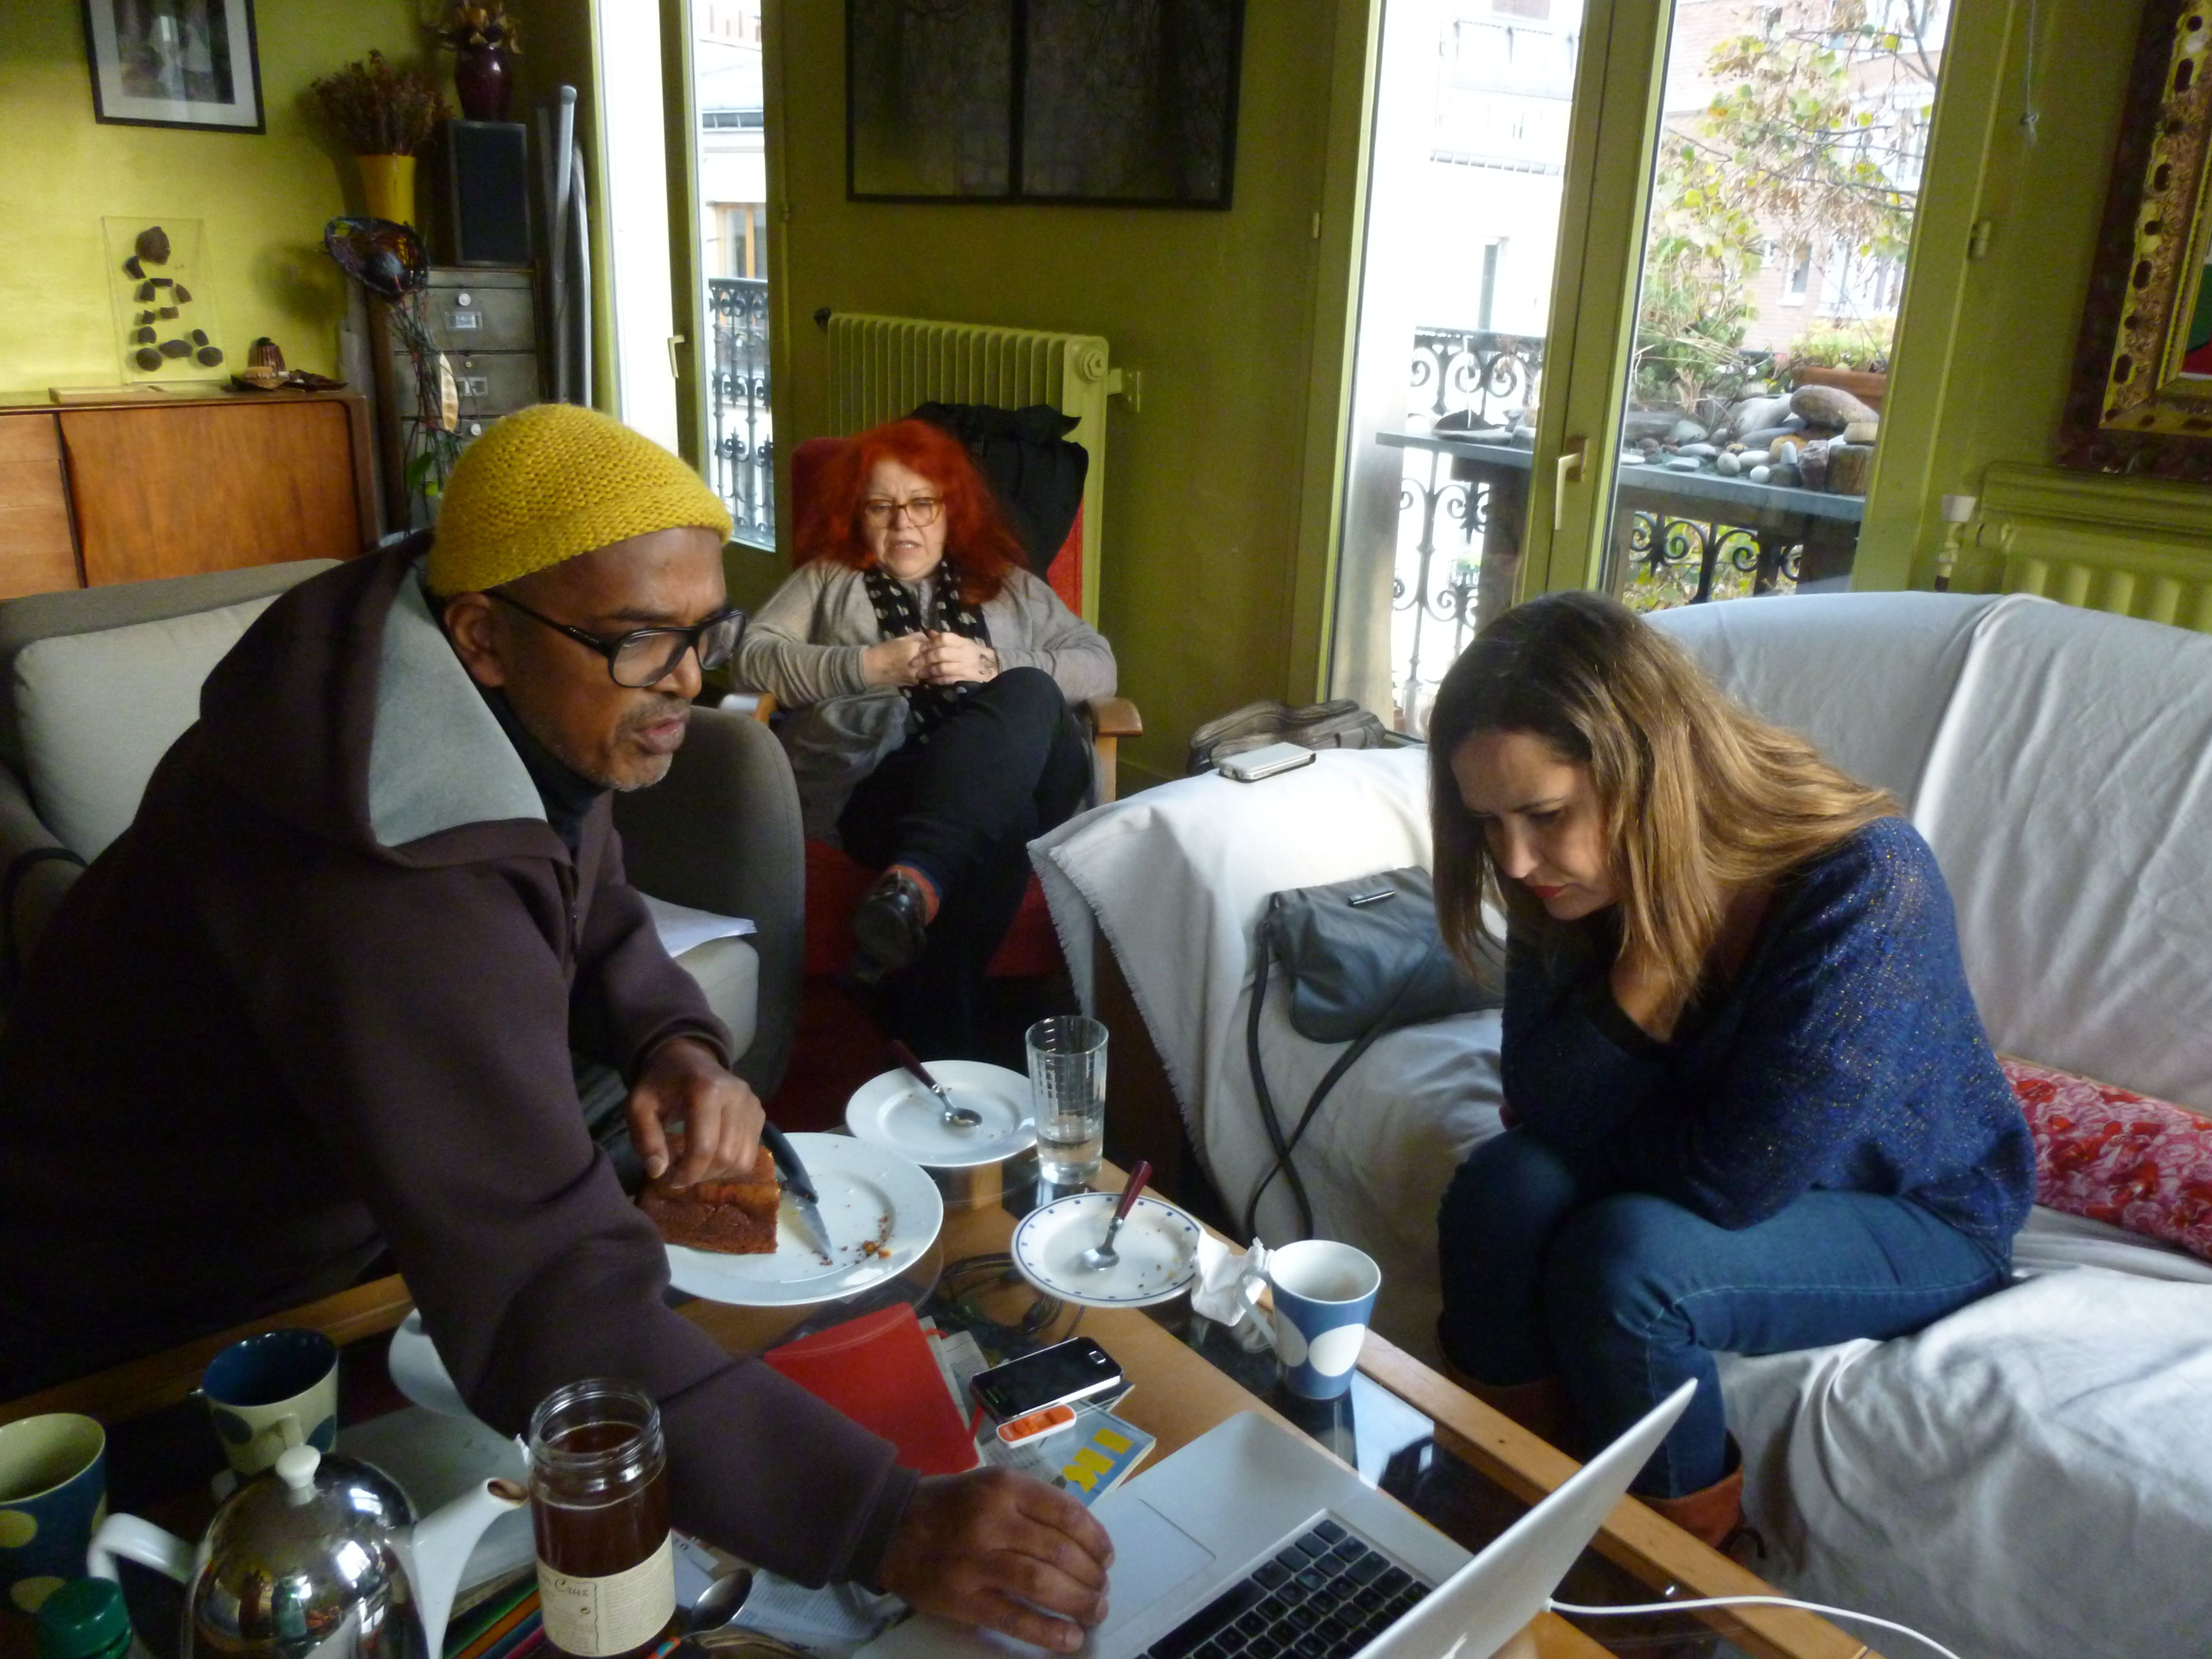 Isabelle Levenez (r.) during a meeting with L'Artocarpe Paris members. Raymond Spartacus (l.) and art director Régine Cuzin are also visible on the picture.